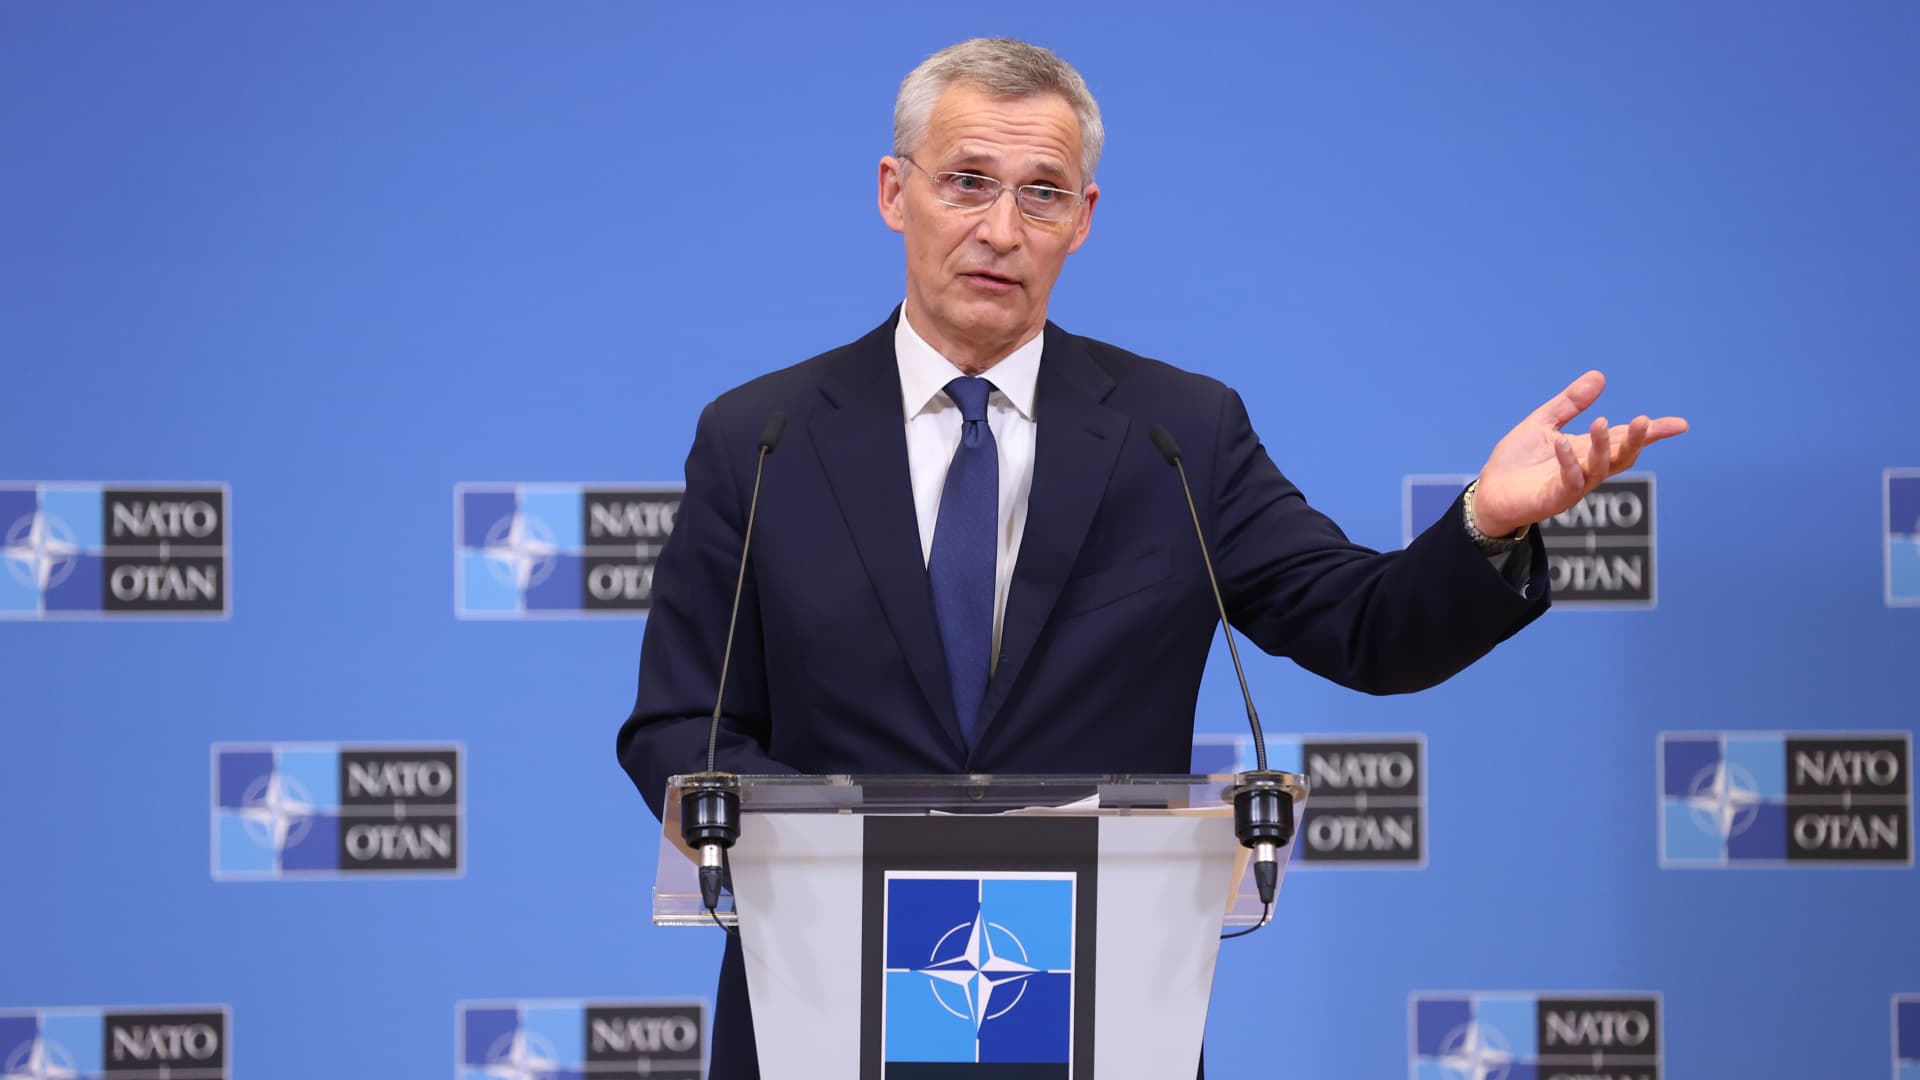 NATO chief says Finland welcome to join allies